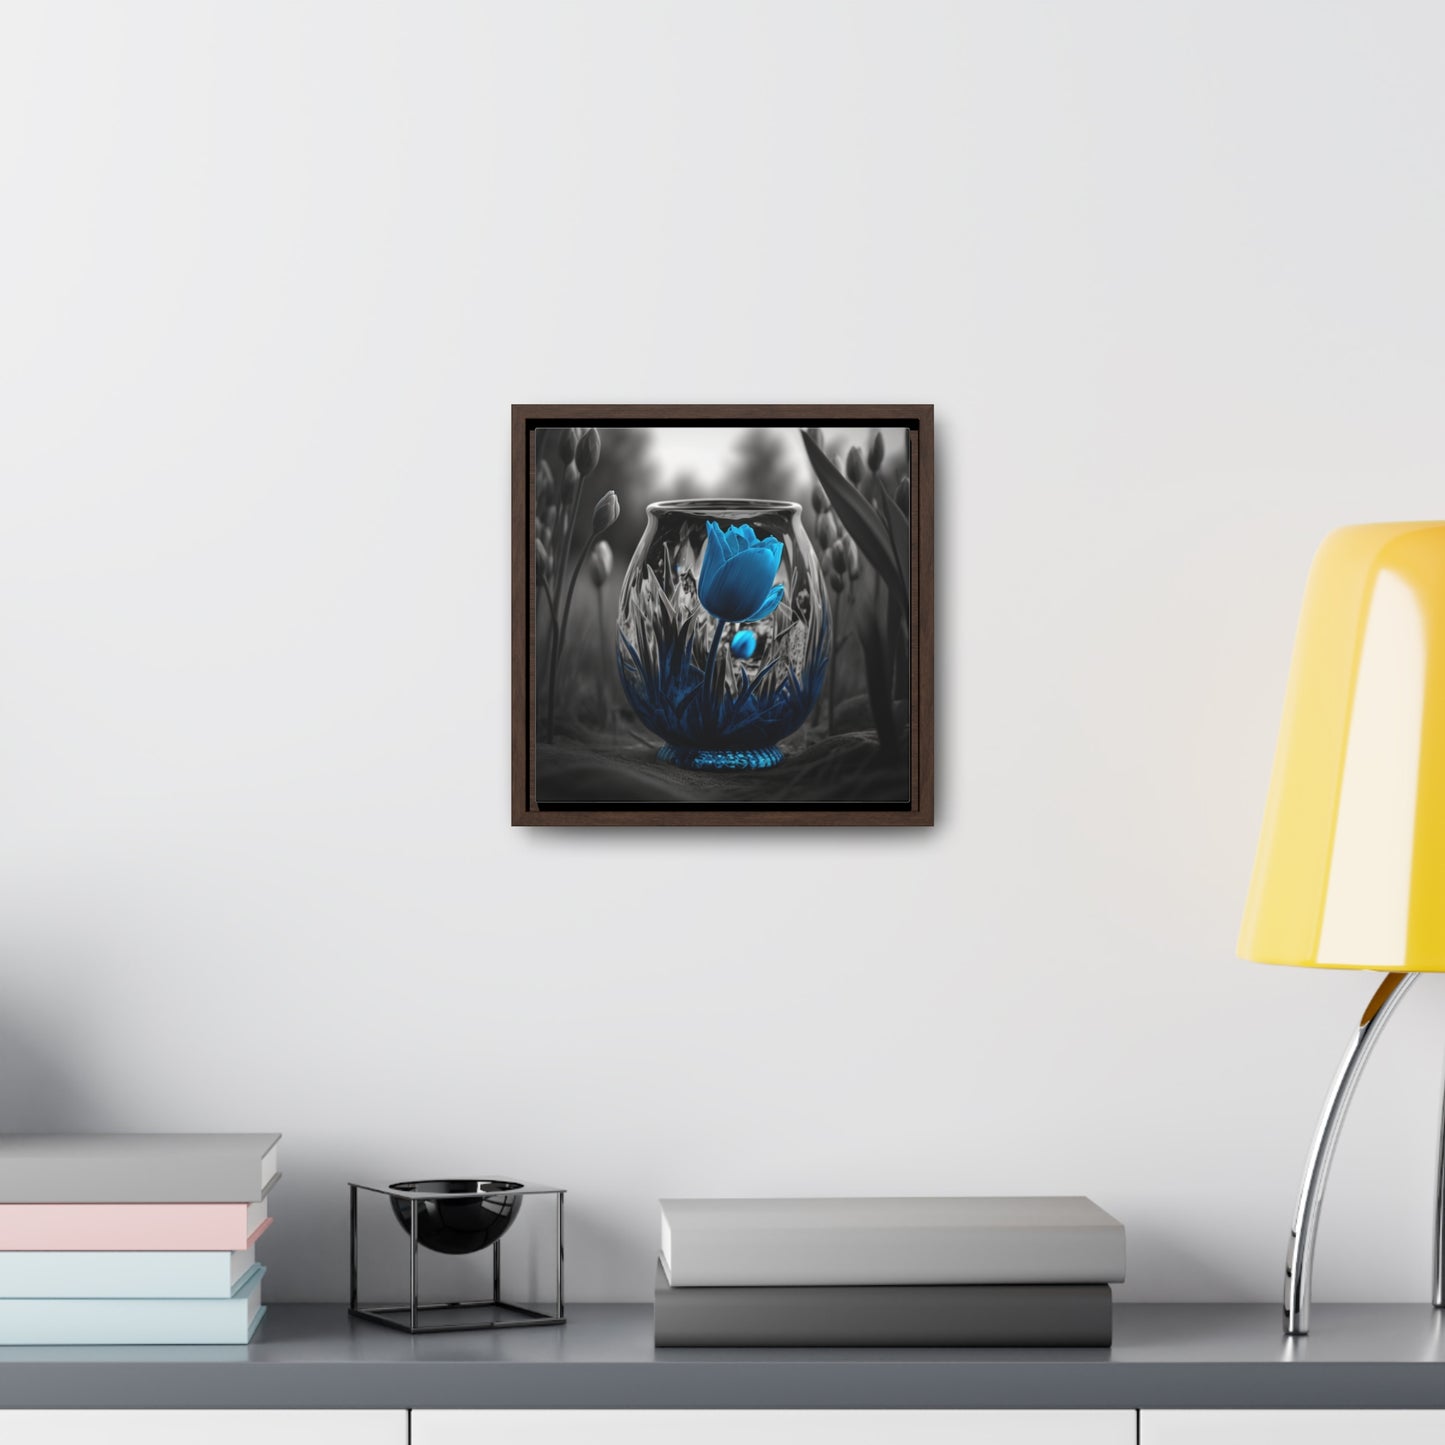 Gallery Canvas Wraps, Square Frame Tulip Blue 6